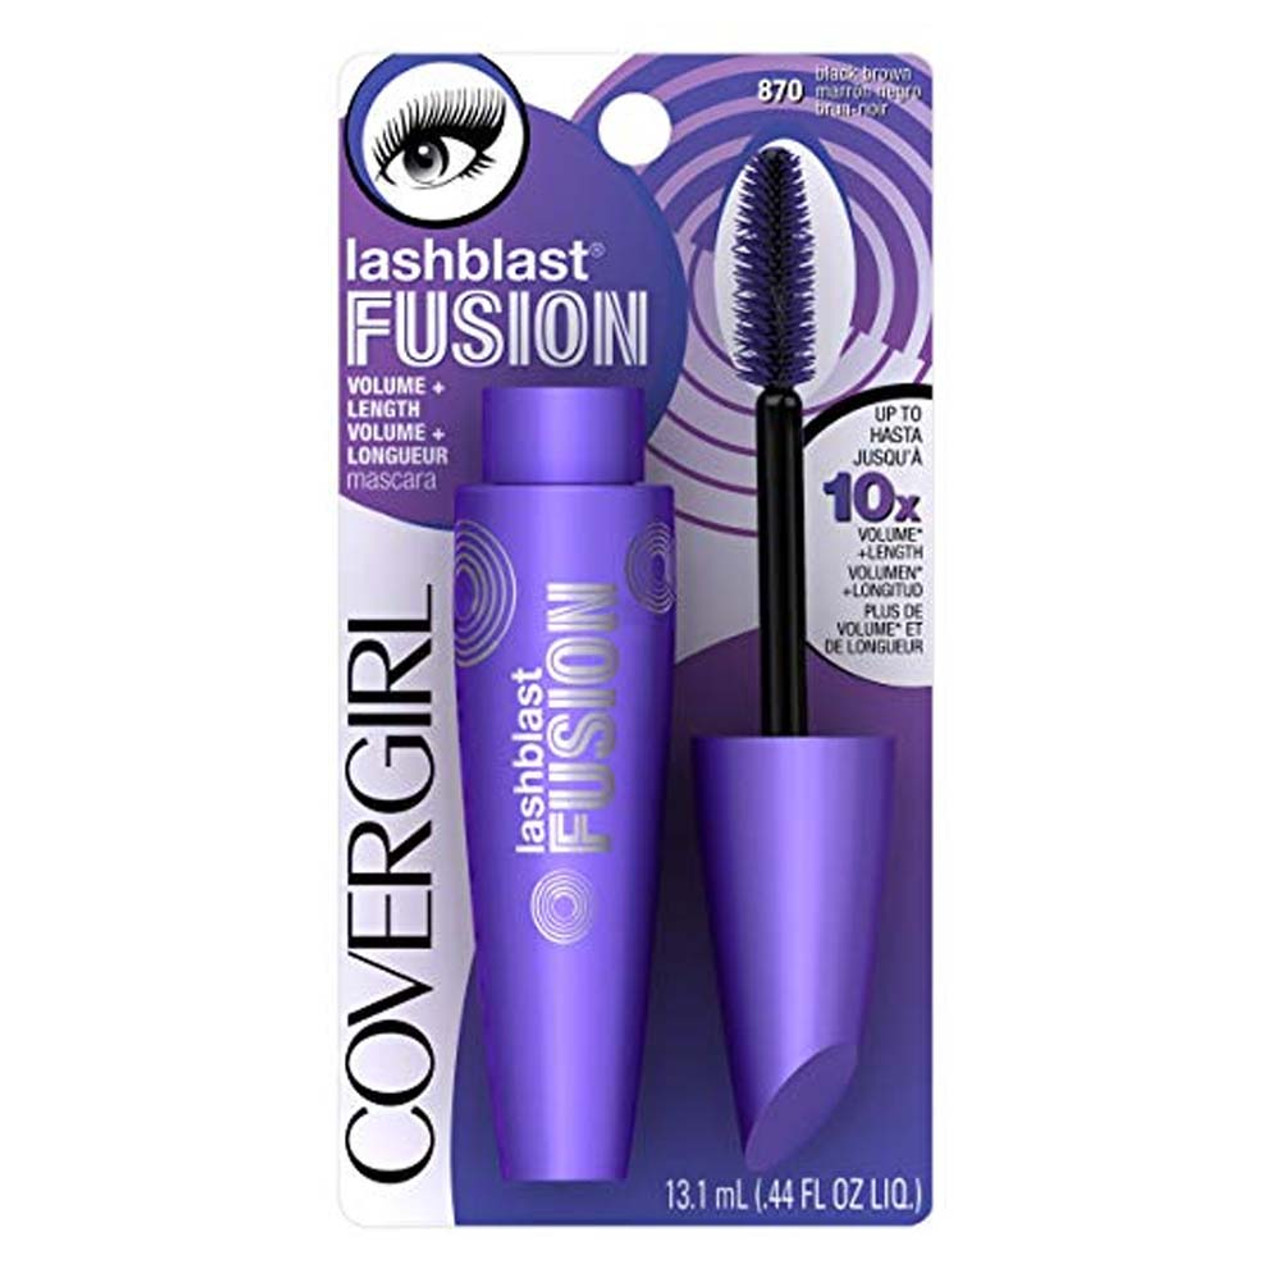 ebbe tidevand krokodille couscous COVERGIRL LashBlast Fusion Mascara Black Brown 870, .44 oz (packaging may  vary) - The Online Drugstore ©